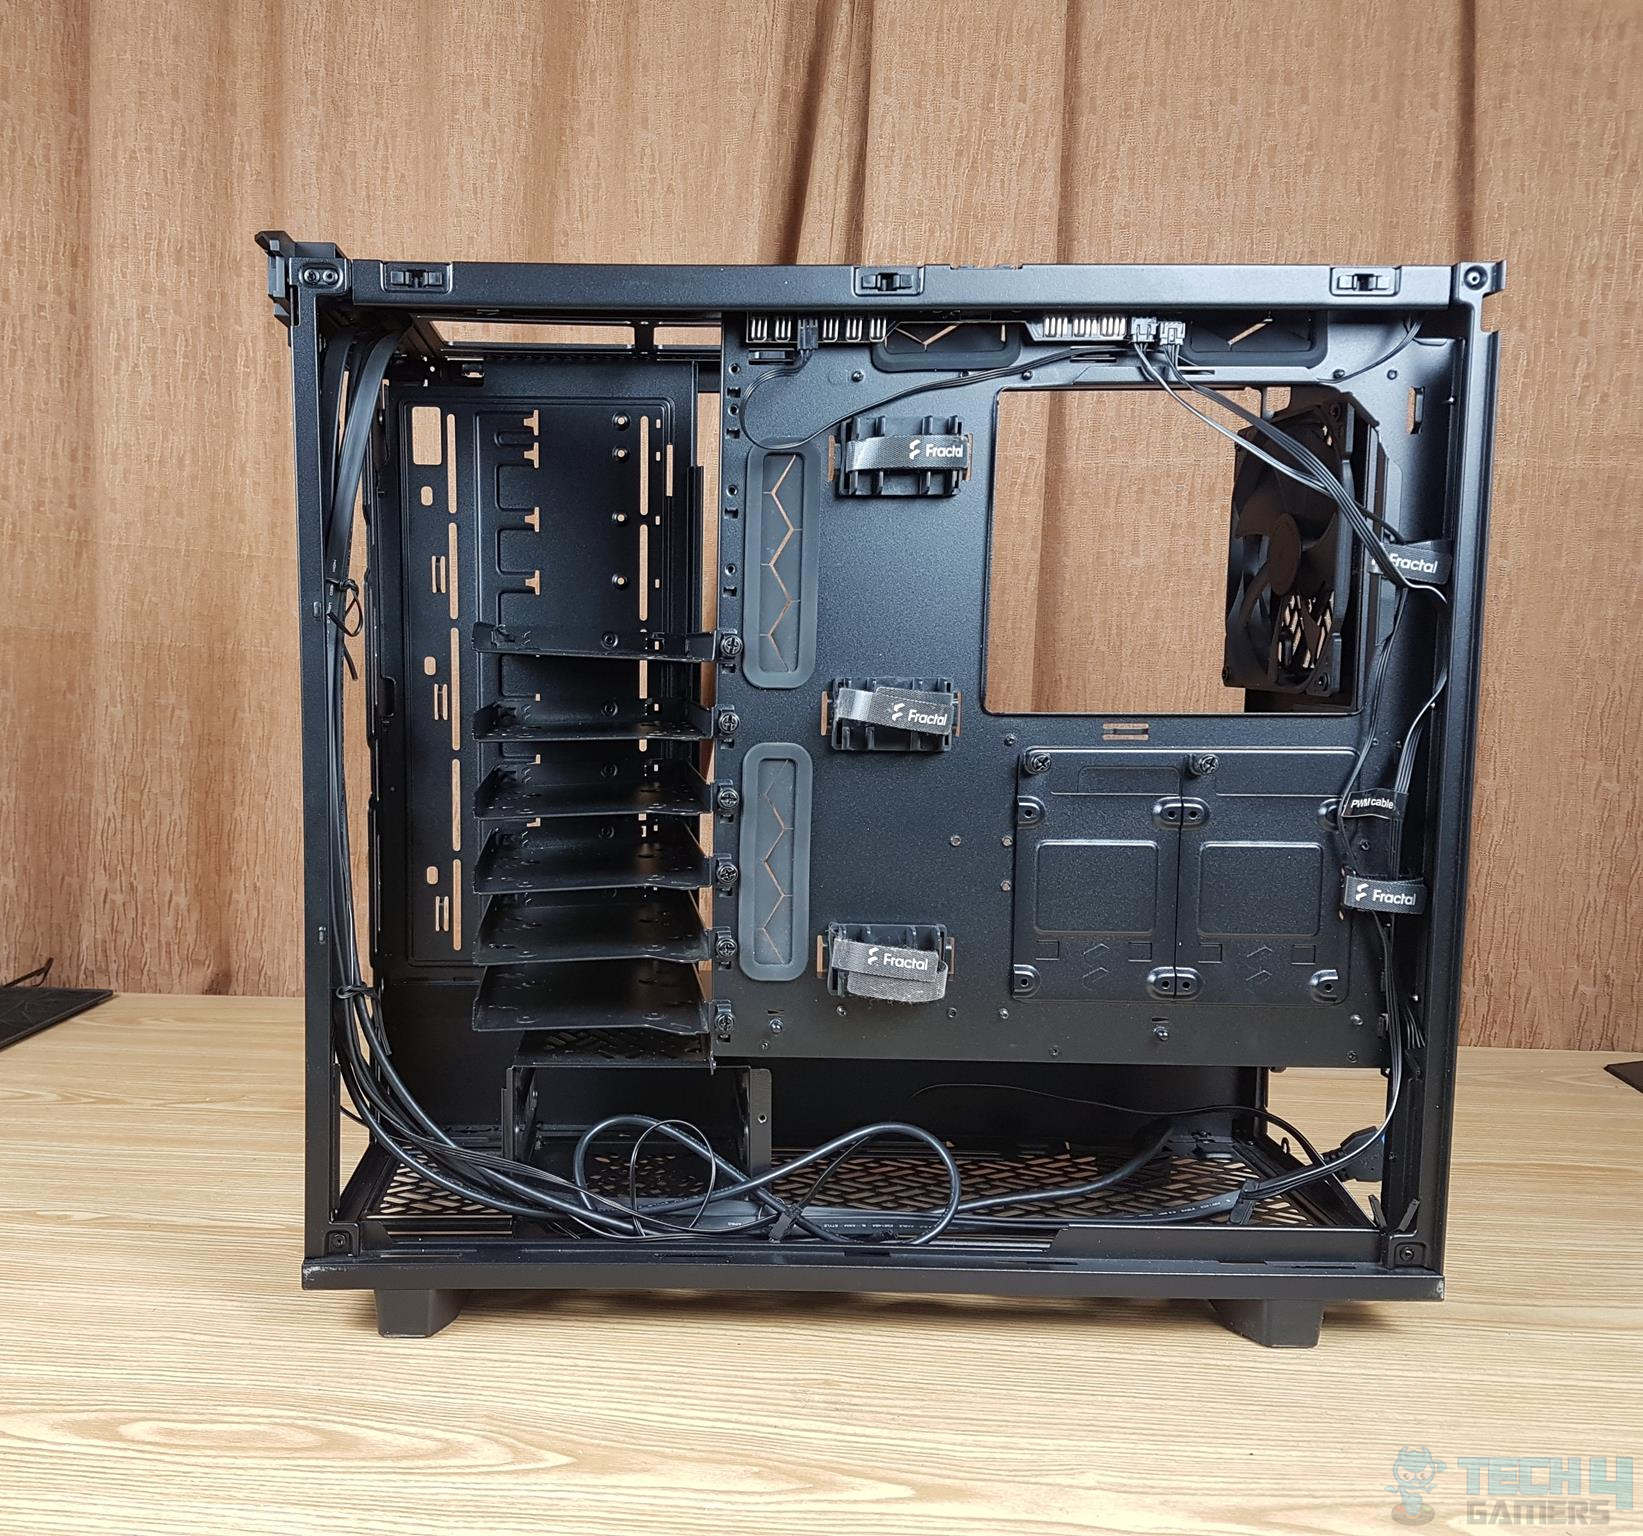 Fractal Design Meshify 2 — The case with a superlative storage style